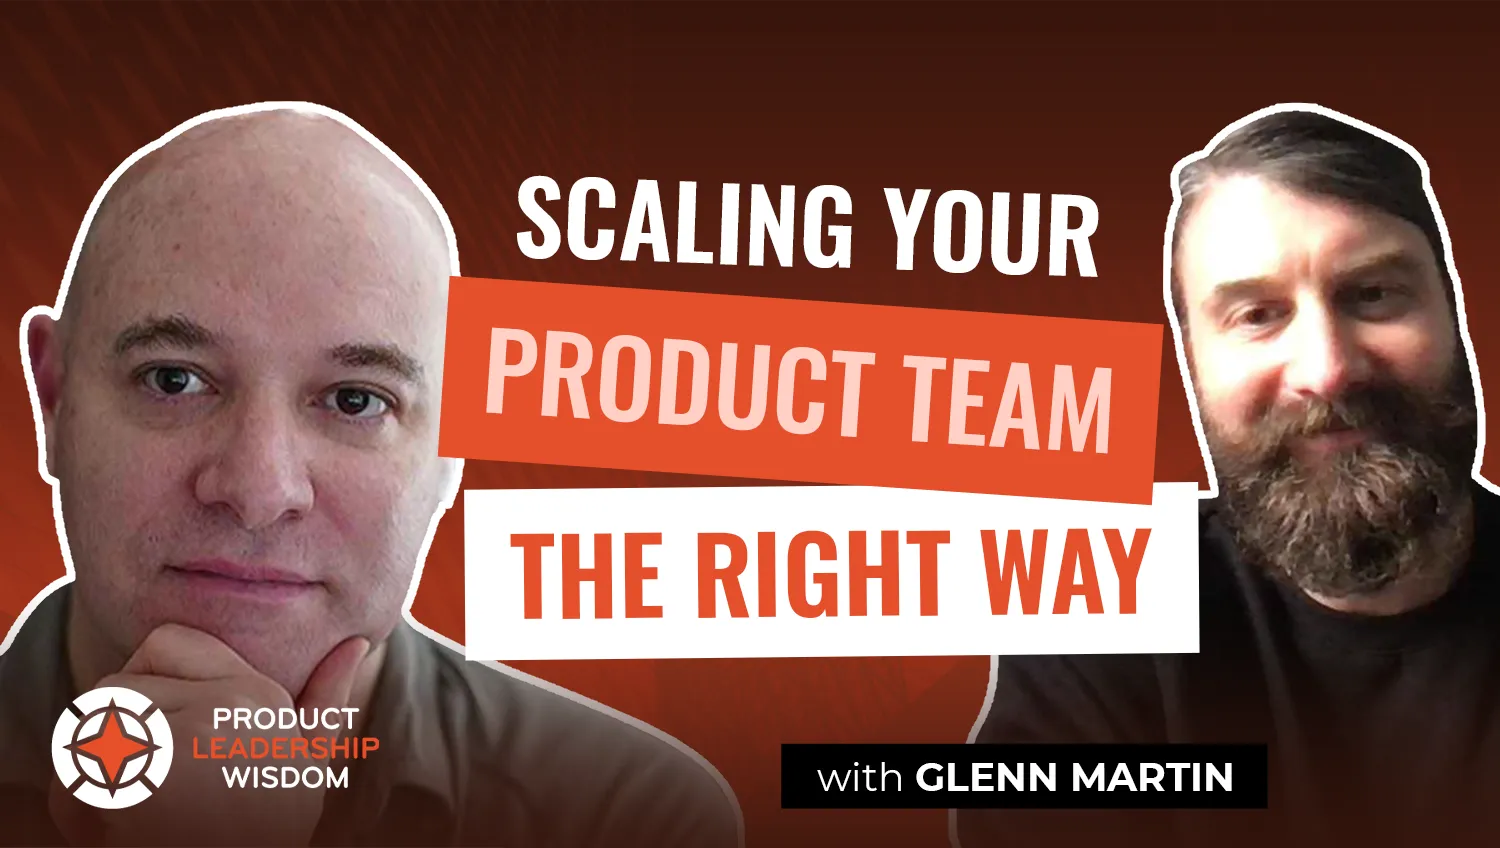 Scaling your Product Team with Glenn Martin